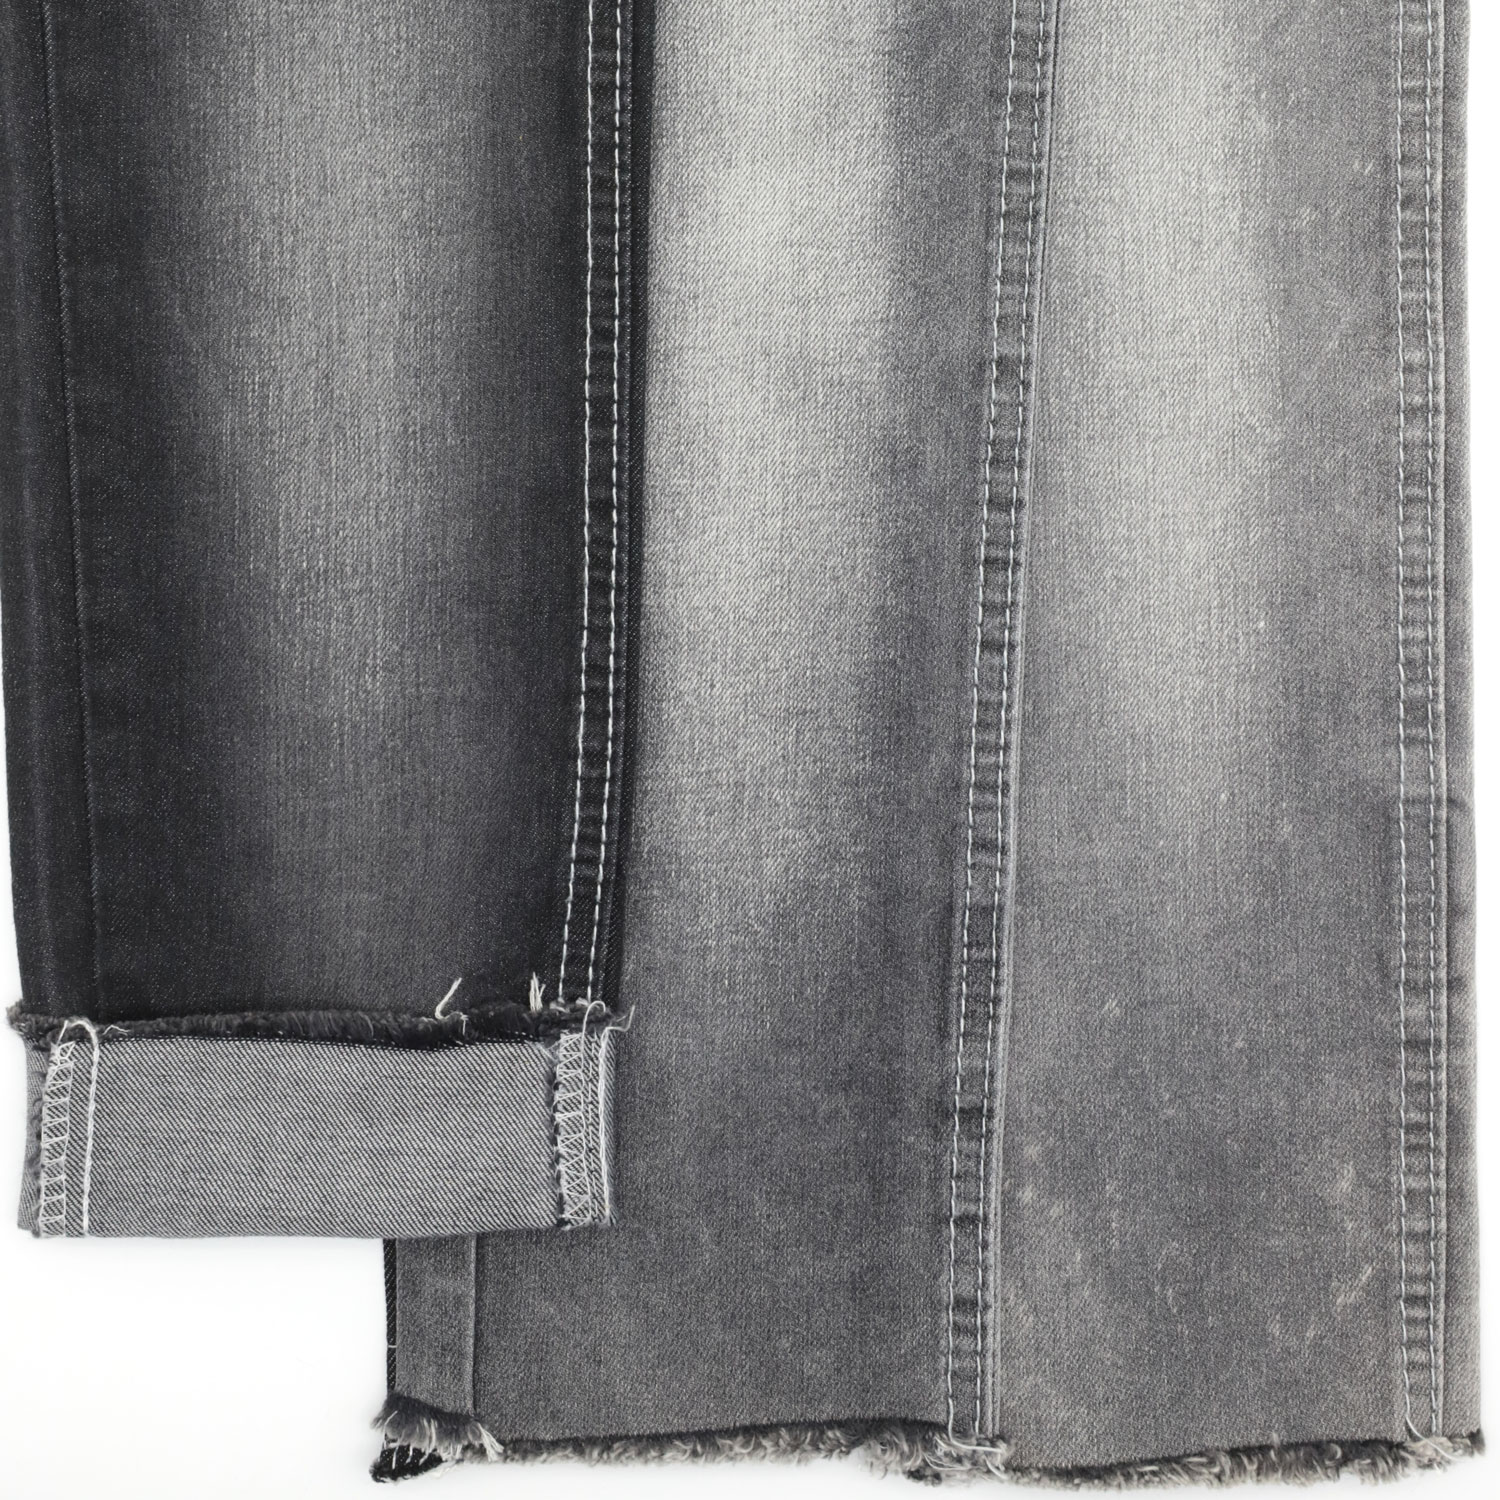 China Denim Fabric - How to Use the Best One for Your Needs 2